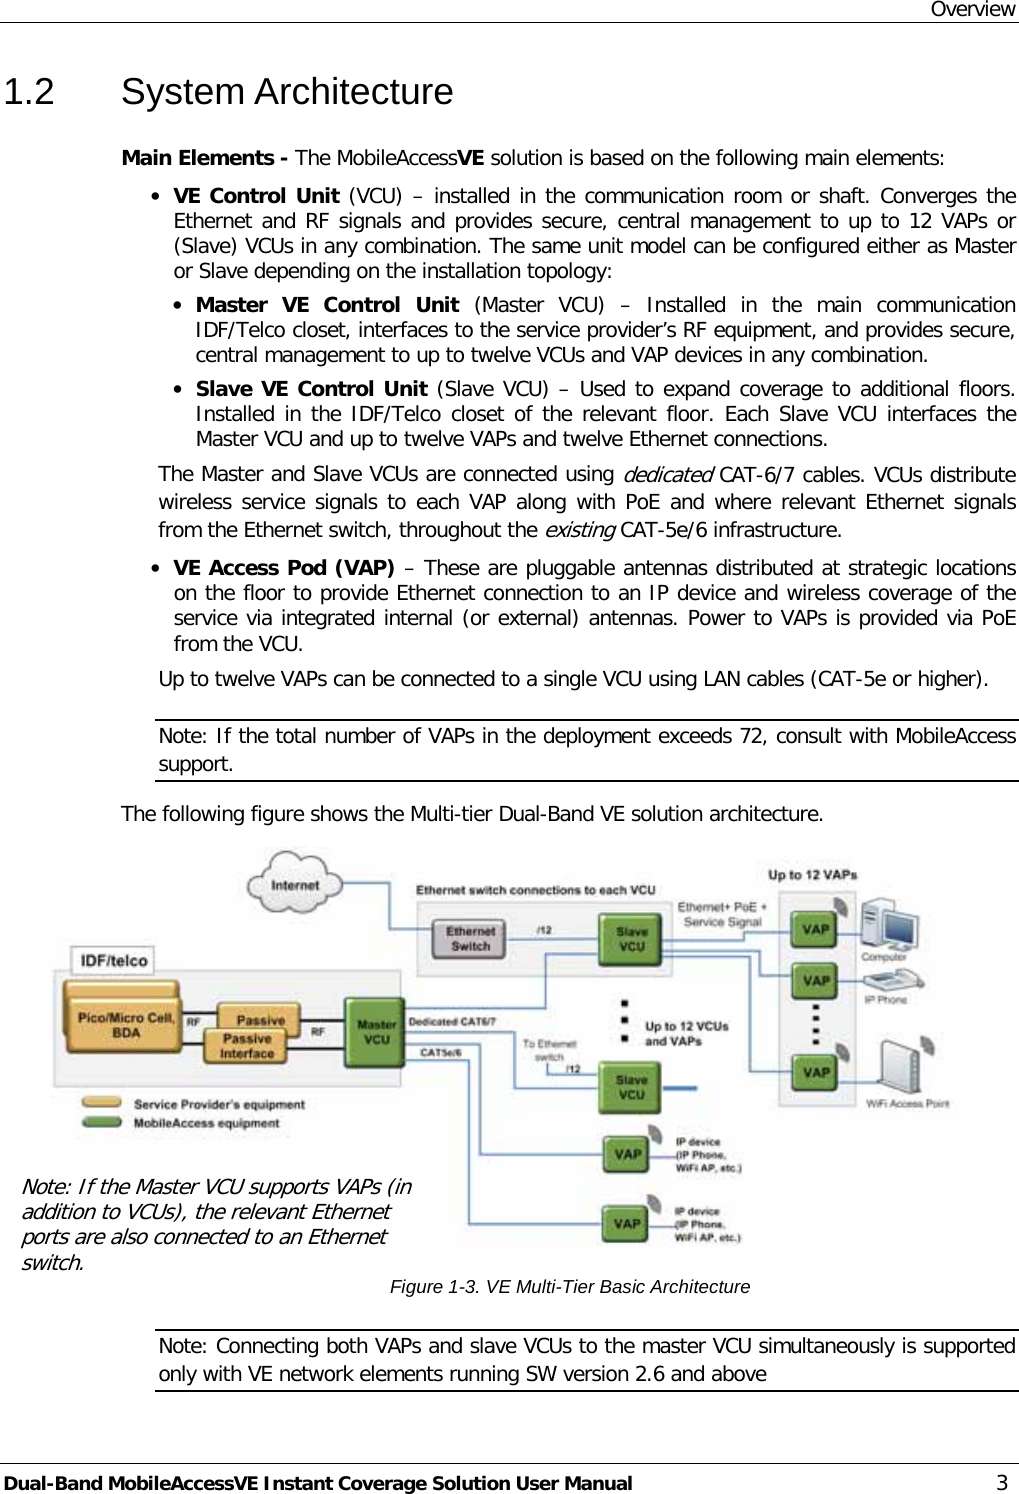 Overview Dual-Band MobileAccessVE Instant Coverage Solution User Manual 3 1.2  System Architecture Main Elements - The MobileAccessVE solution is based on the following main elements:  · VE Control Unit (VCU) – installed in the communication room or shaft. Converges the Ethernet and RF signals and provides secure, central management to up to 12 VAPs or (Slave) VCUs in any combination. The same unit model can be configured either as Master or Slave depending on the installation topology: · Master  VE  Control  Unit (Master VCU) –  Installed in the main communication IDF/Telco closet, interfaces to the service provider’s RF equipment, and provides secure, central management to up to twelve VCUs and VAP devices in any combination.  · Slave VE Control Unit (Slave VCU) – Used to expand coverage to additional floors. Installed in the IDF/Telco closet of the relevant floor. Each Slave  VCU interfaces the Master VCU and up to twelve VAPs and twelve Ethernet connections.  The Master and Slave VCUs are connected using dedicated CAT-6/7 cables. VCUs distribute wireless service signals to each VAP along with PoE and where relevant Ethernet signals from the Ethernet switch, throughout the existing CAT-5e/6 infrastructure.  · VE Access Pod (VAP) – These are pluggable antennas distributed at strategic locations on the floor to provide Ethernet connection to an IP device and wireless coverage of the service via integrated internal (or external) antennas. Power to VAPs is provided via PoE from the VCU.  Up to twelve VAPs can be connected to a single VCU using LAN cables (CAT-5e or higher). Note: If the total number of VAPs in the deployment exceeds 72, consult with MobileAccess support. The following figure shows the Multi-tier Dual-Band VE solution architecture.  Figure  1-3. VE Multi-Tier Basic Architecture Note: Connecting both VAPs and slave VCUs to the master VCU simultaneously is supported only with VE network elements running SW version 2.6 and above Note: If the Master VCU supports VAPs (in addition to VCUs), the relevant Ethernet ports are also connected to an Ethernet switch. 